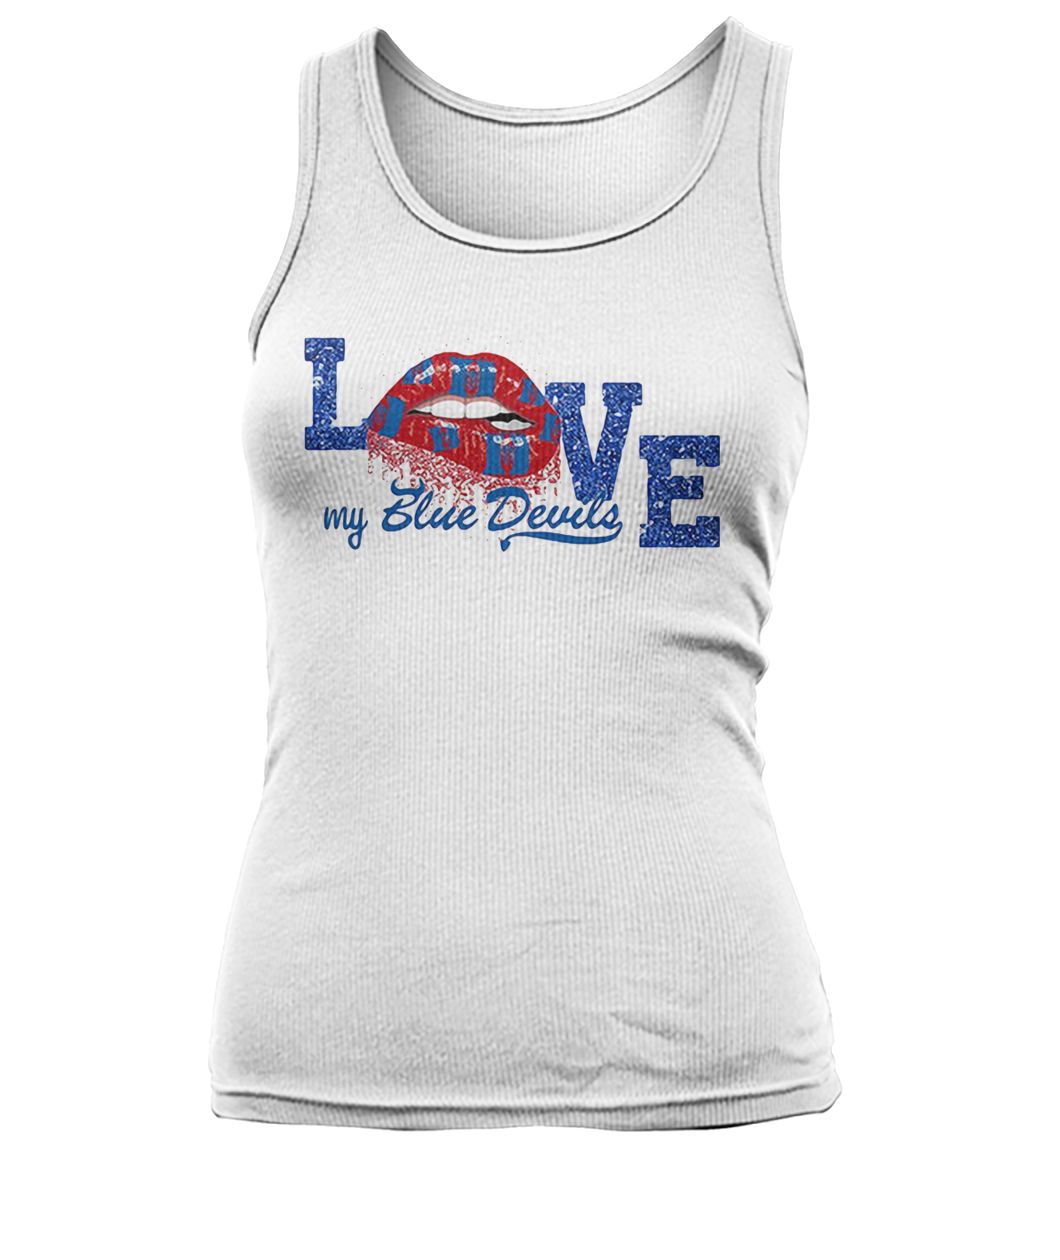 Blue devils drum and bugle corps love my team men's tank top